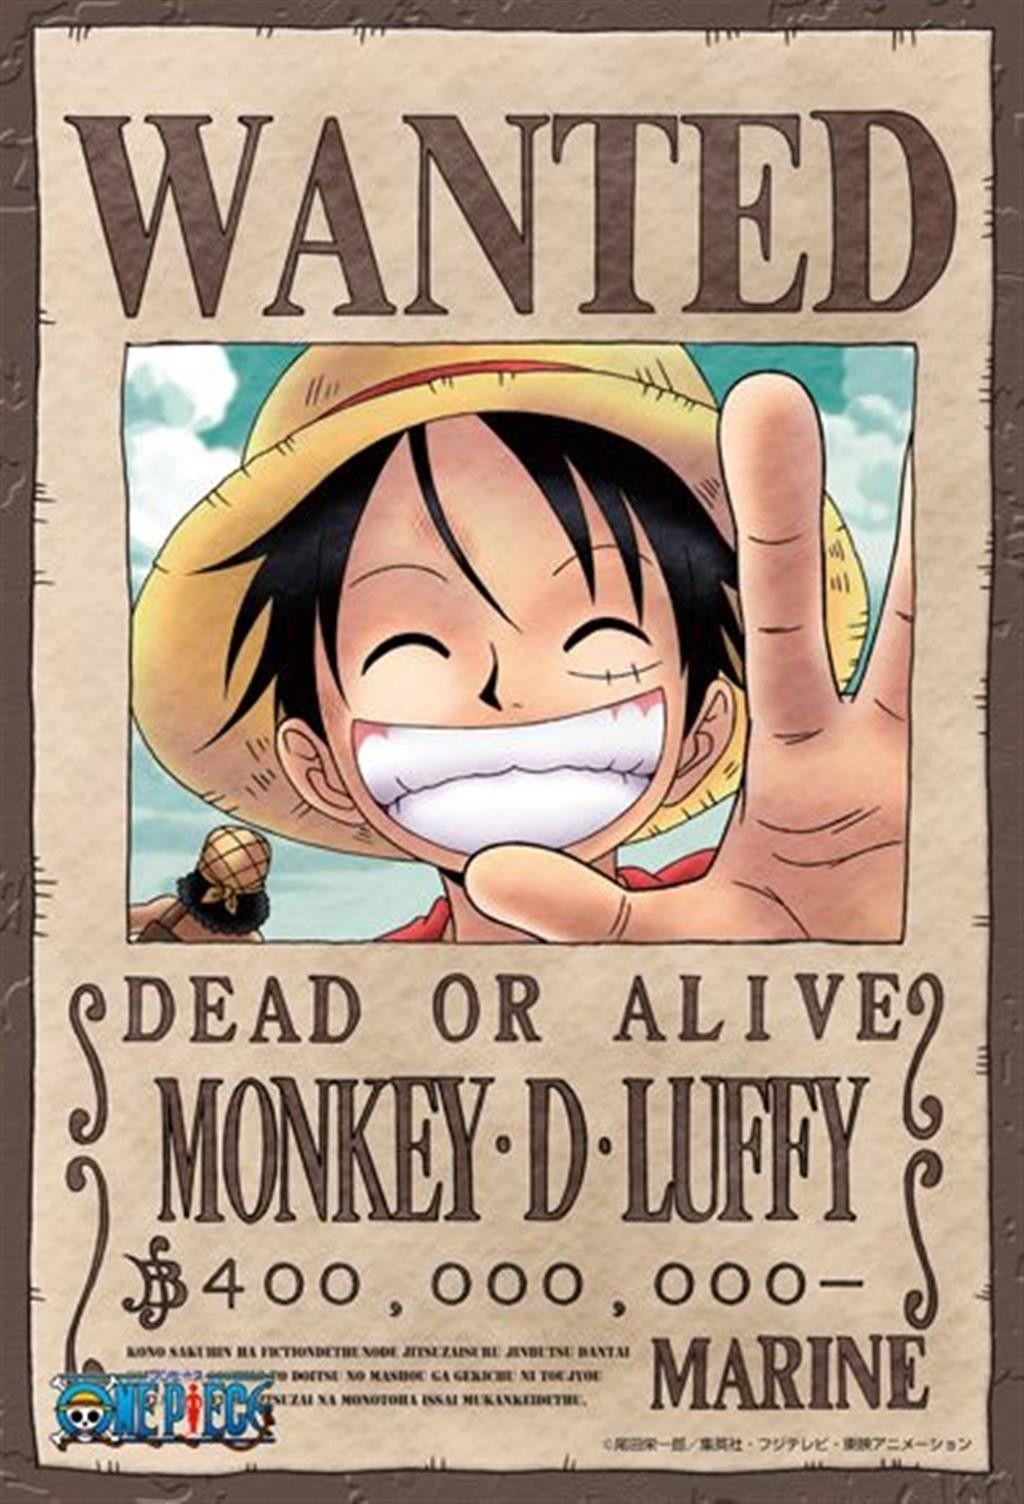 Luffy One Piece Wanted Poster Picture. One piece japan, Monkey d luffy, One piece luffy